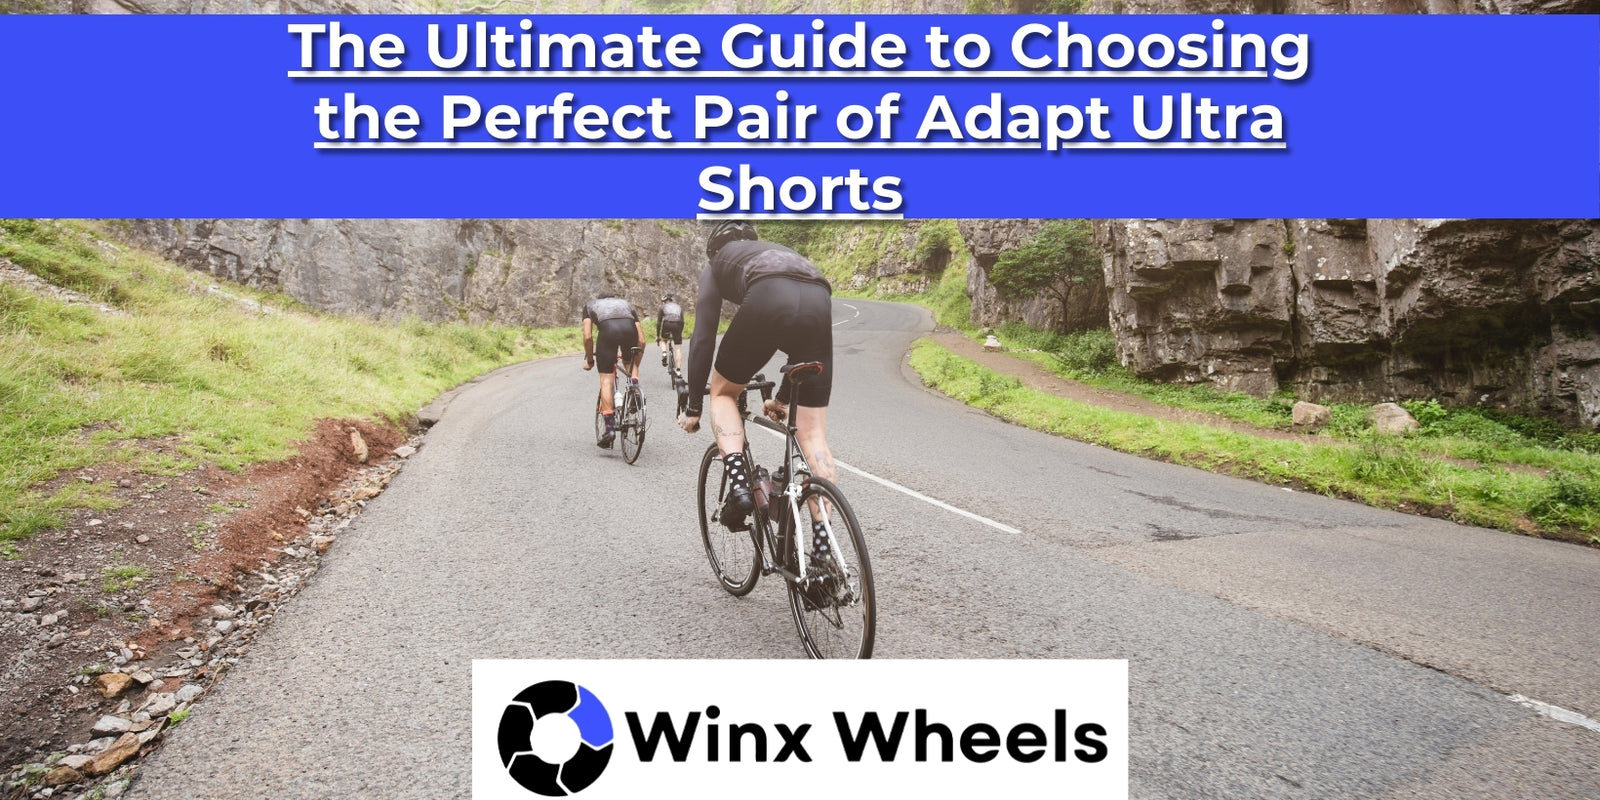 The Ultimate Guide to Choosing the Perfect Pair of Adapt Ultra Shorts